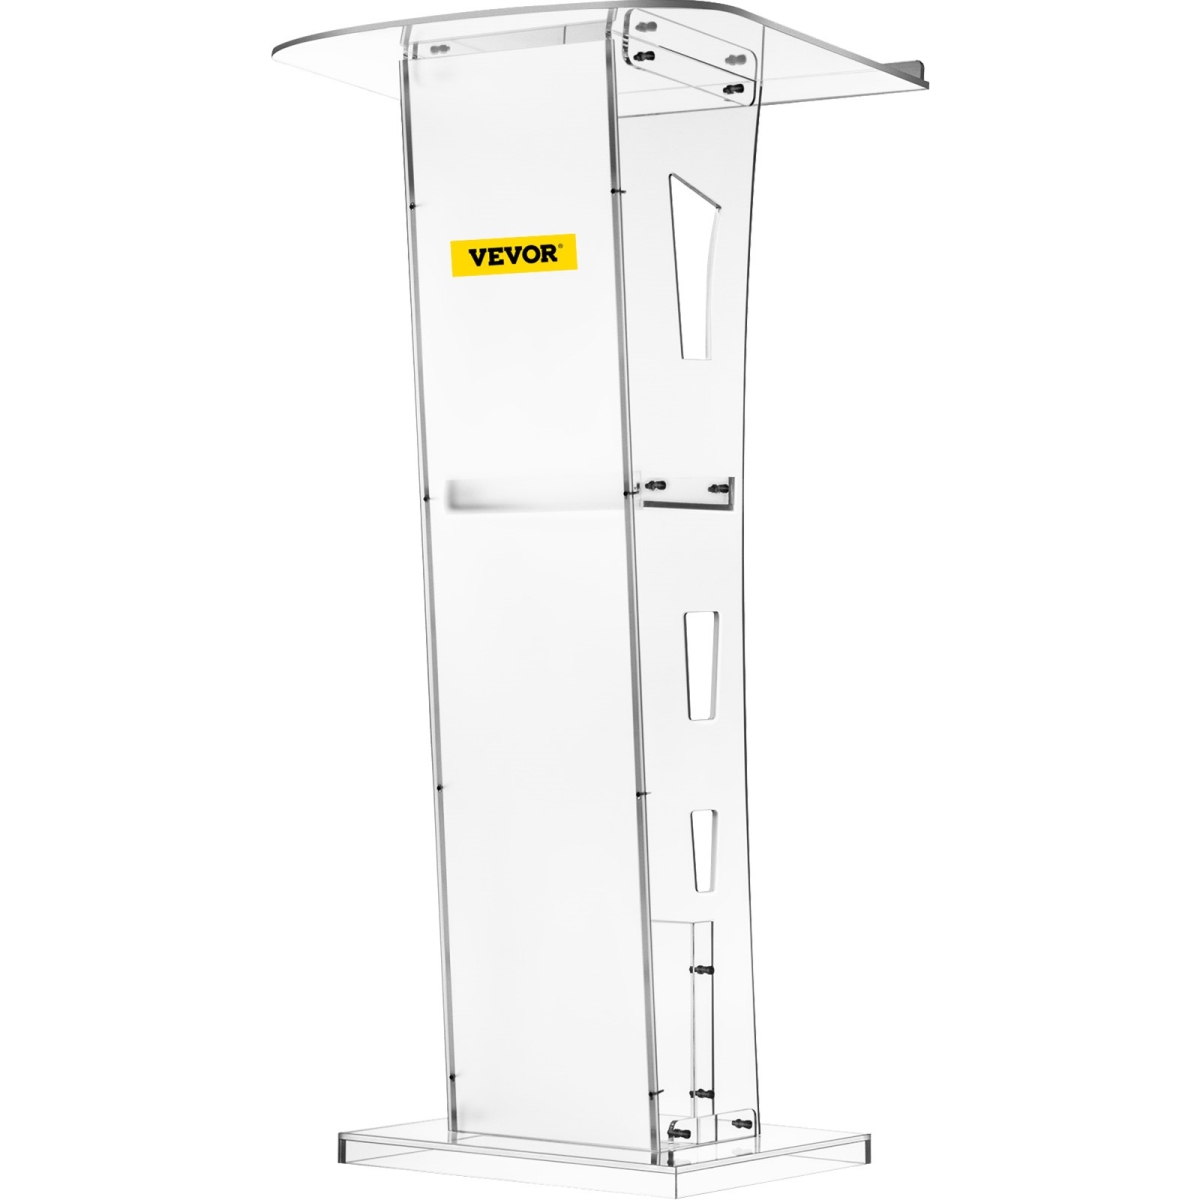 Picture of Vevor JTYKLYJT47.5C0001V0 Acrylic Podium 47.5 in. Tall Plexiglass Podium 26.8 x 14.3 in. Table Acrylic Pulpits